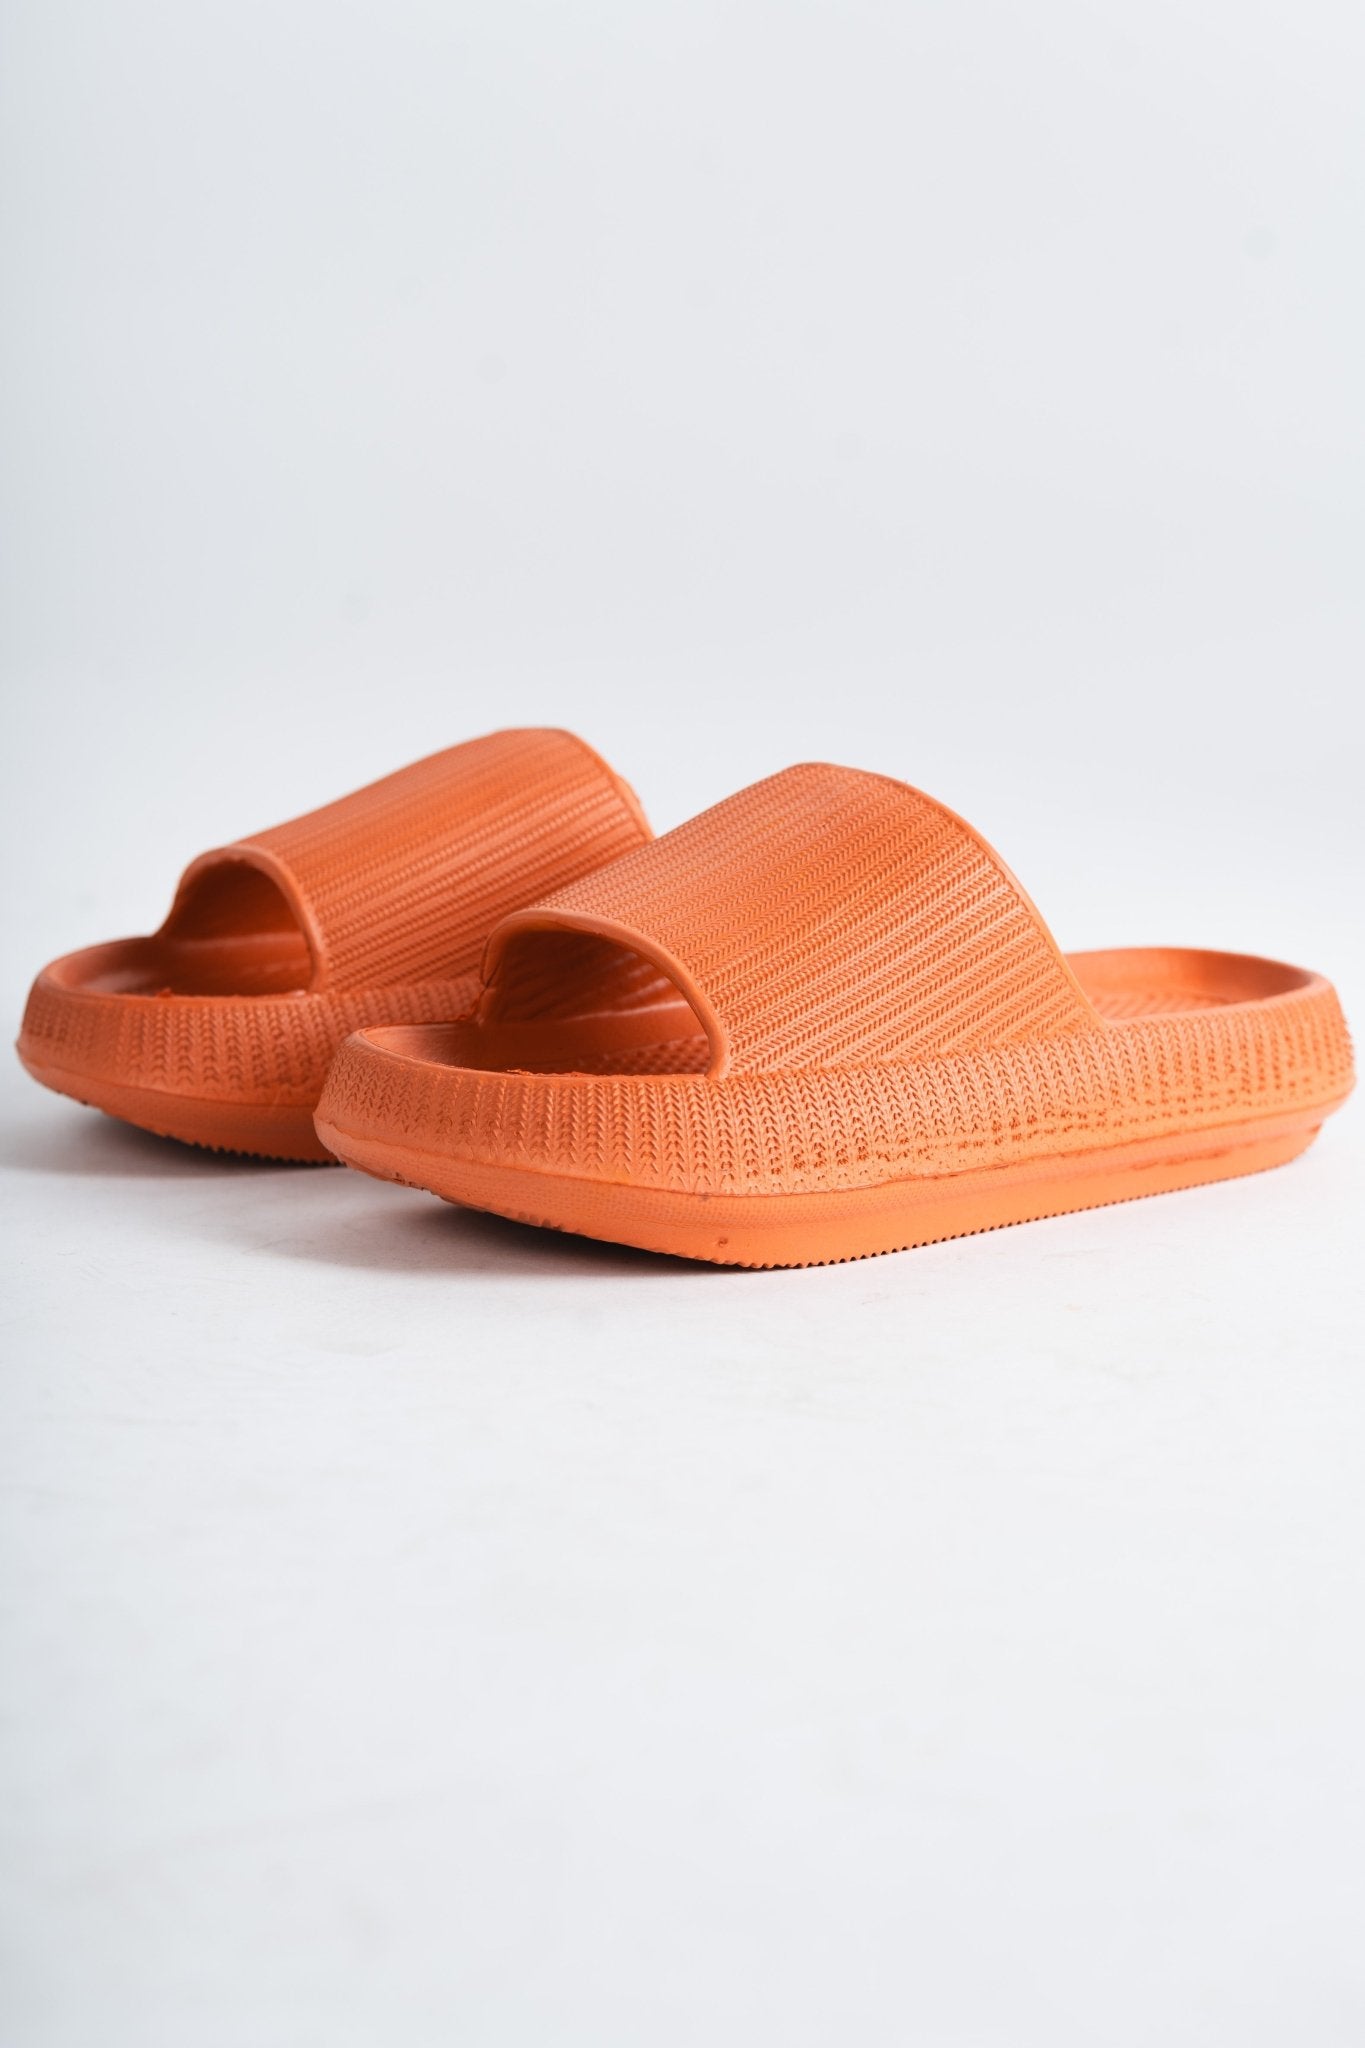 Eva pillow slides terracotta - Trendy shoes - Cute Vacation Collection at Lush Fashion Lounge Boutique in Oklahoma City